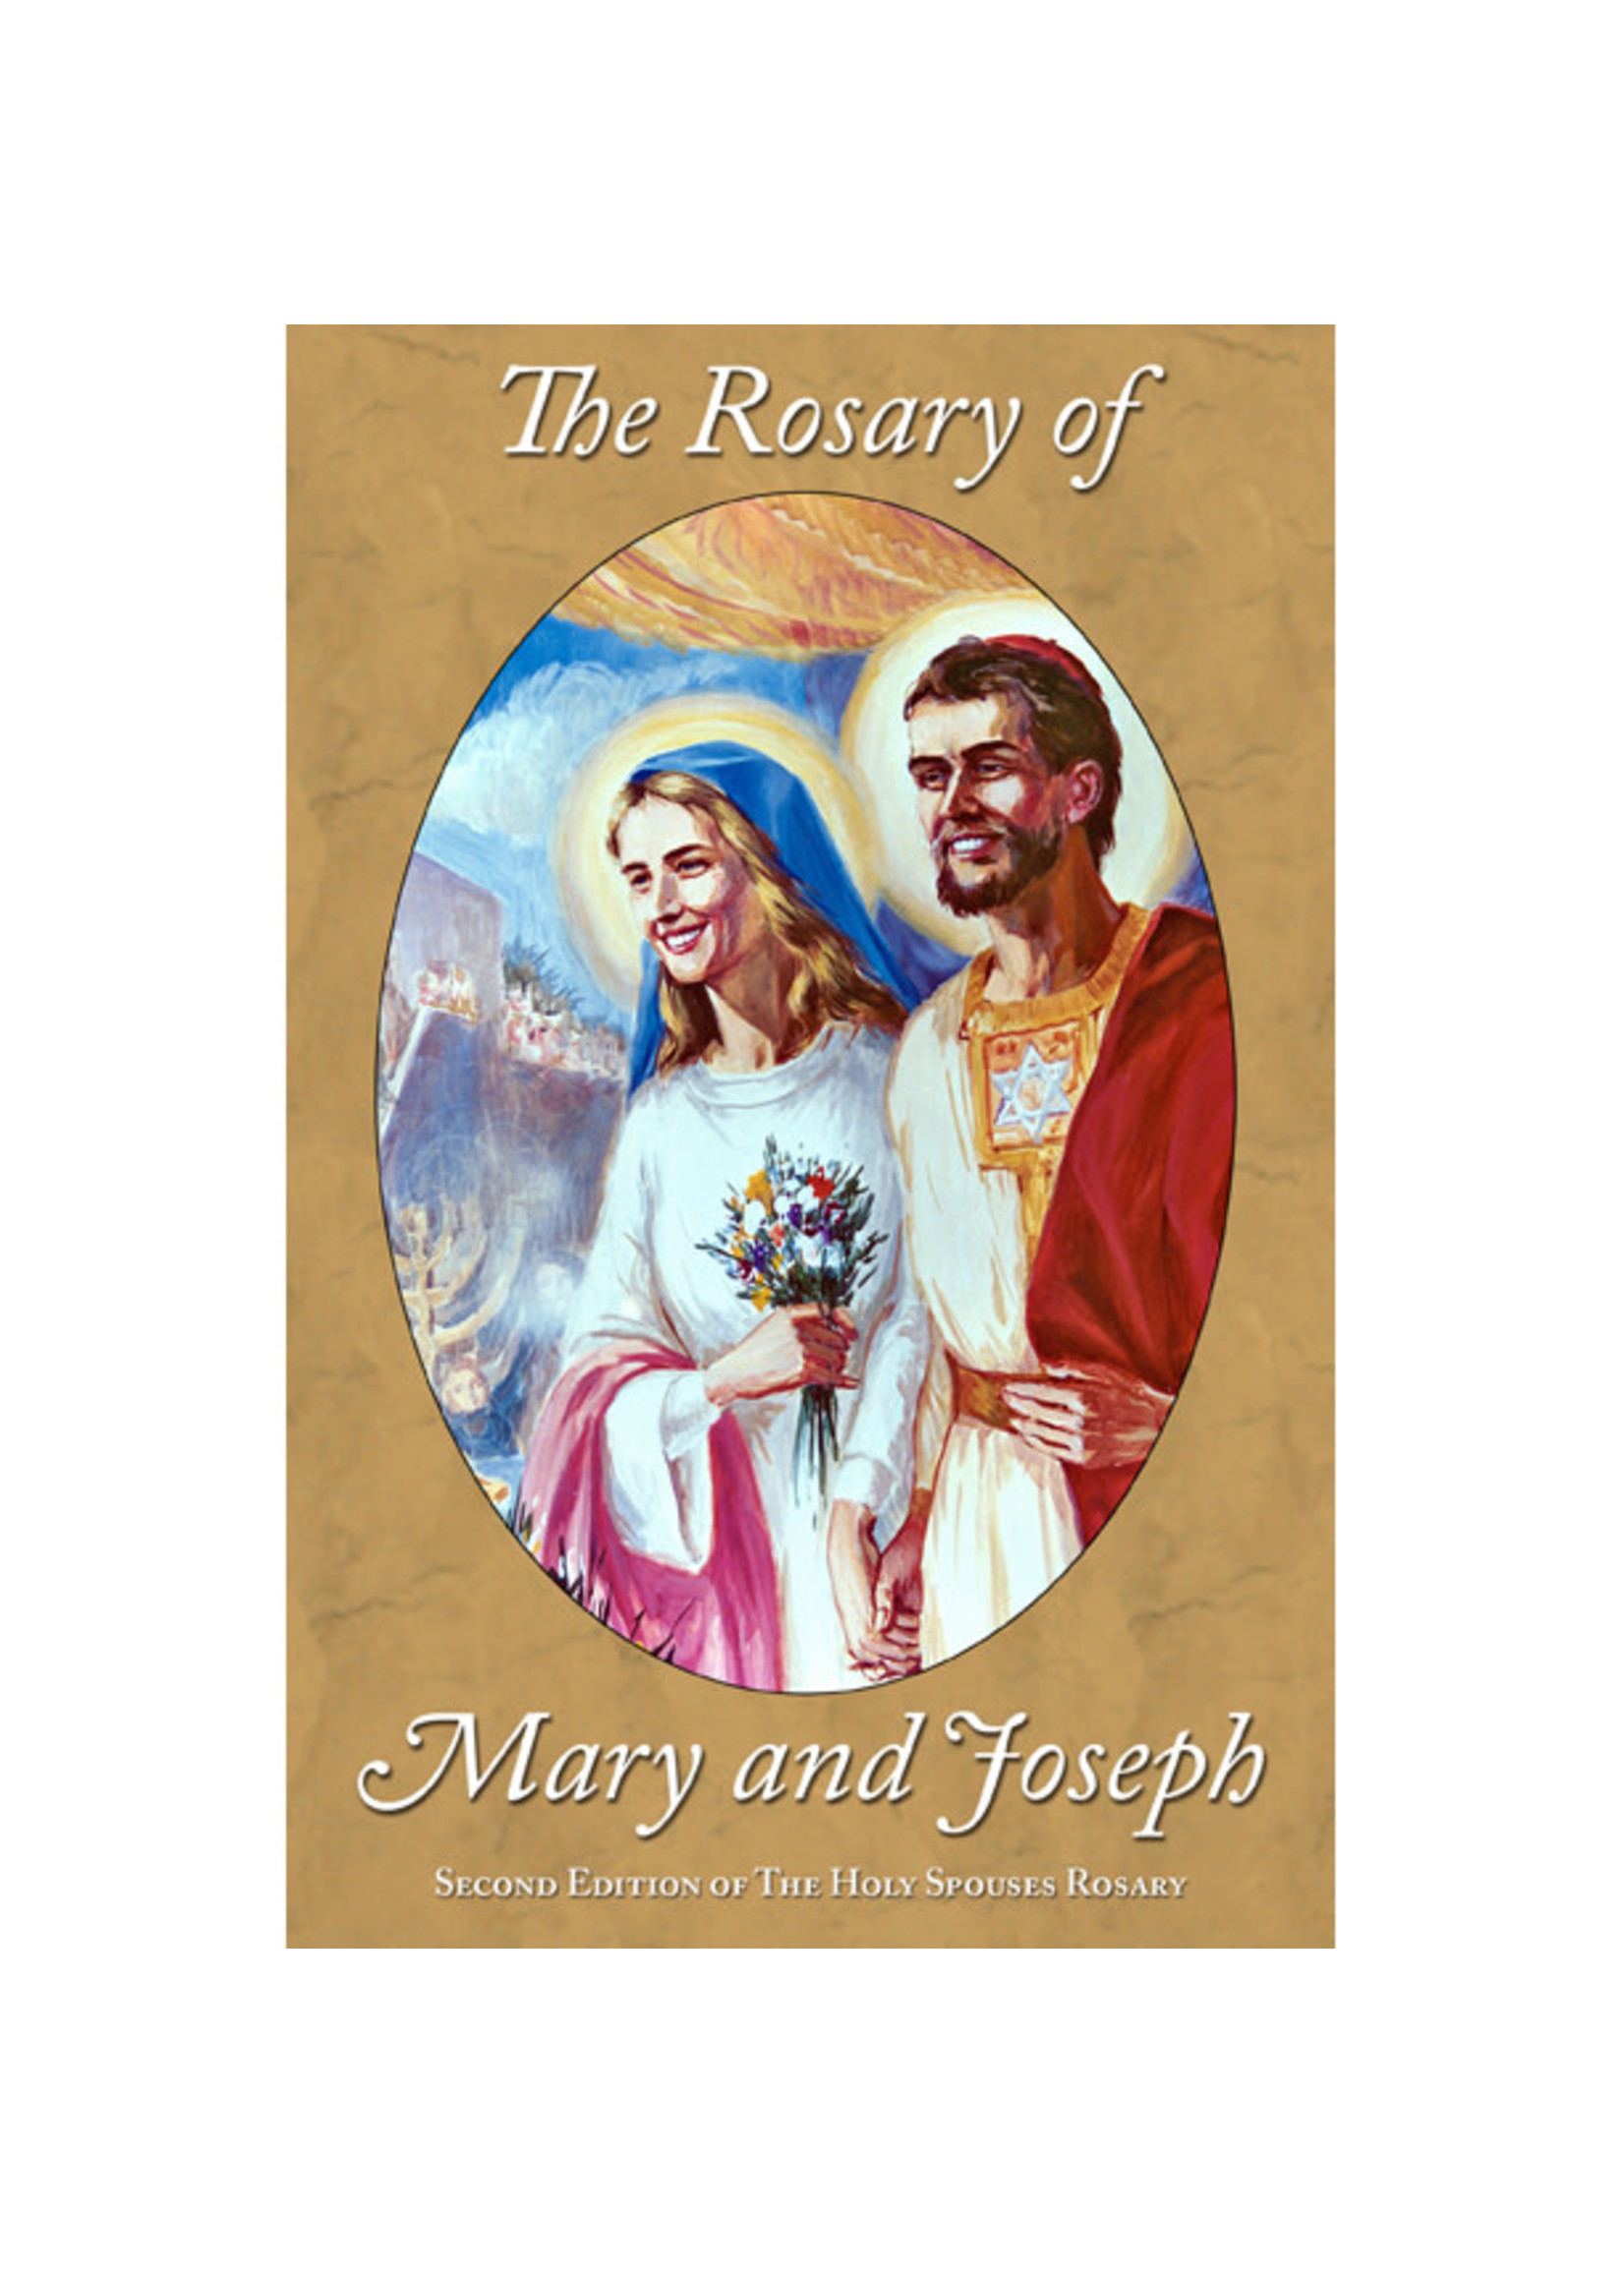 The Rosary of Mary and Joseph, 2nd ed of The Holy Spouses Rosary